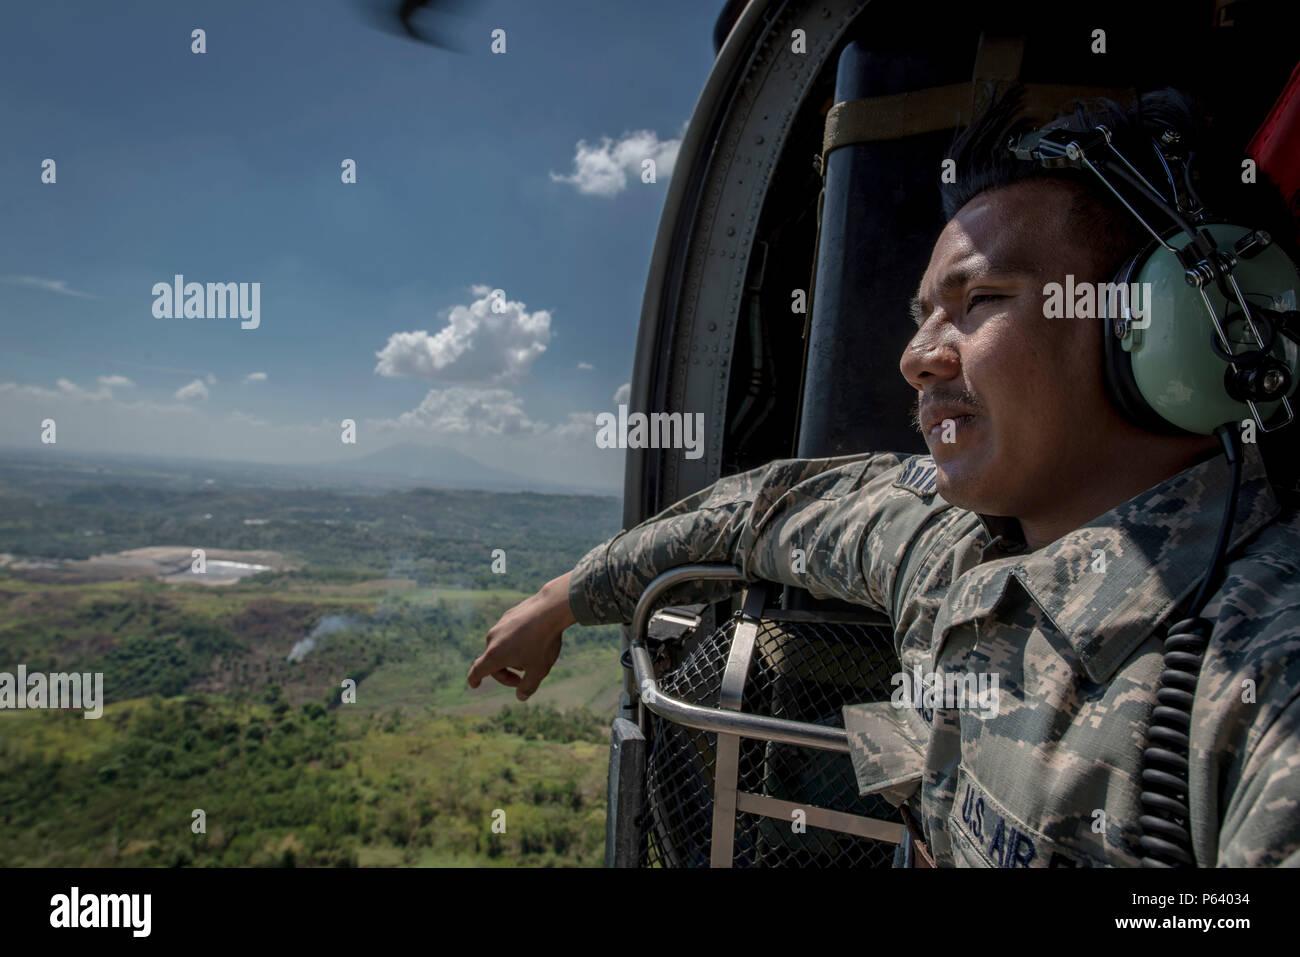 U.S. Air Force Staff Sgt. Jay Perocho Acasio, an aircrew flight equipment journeyman with the 51st Operations Support Squadron, Osan Air Base, Republic of Korea, looks out over his home country during a HH-60G Pave Hawk flight near Clark Air Base, Philippines, April 22, 2016. The staff sergeant is one of three Filipino-American Airmen serving U.S. Pacific Command’s newly stood up Air Contingent in the Philippines. Acasio is from Ozamiz City in the Misamis Occidental, Philippines. (U.S. Air Force photo by Staff Sgt. Benjamin W. Stratton) Stock Photo